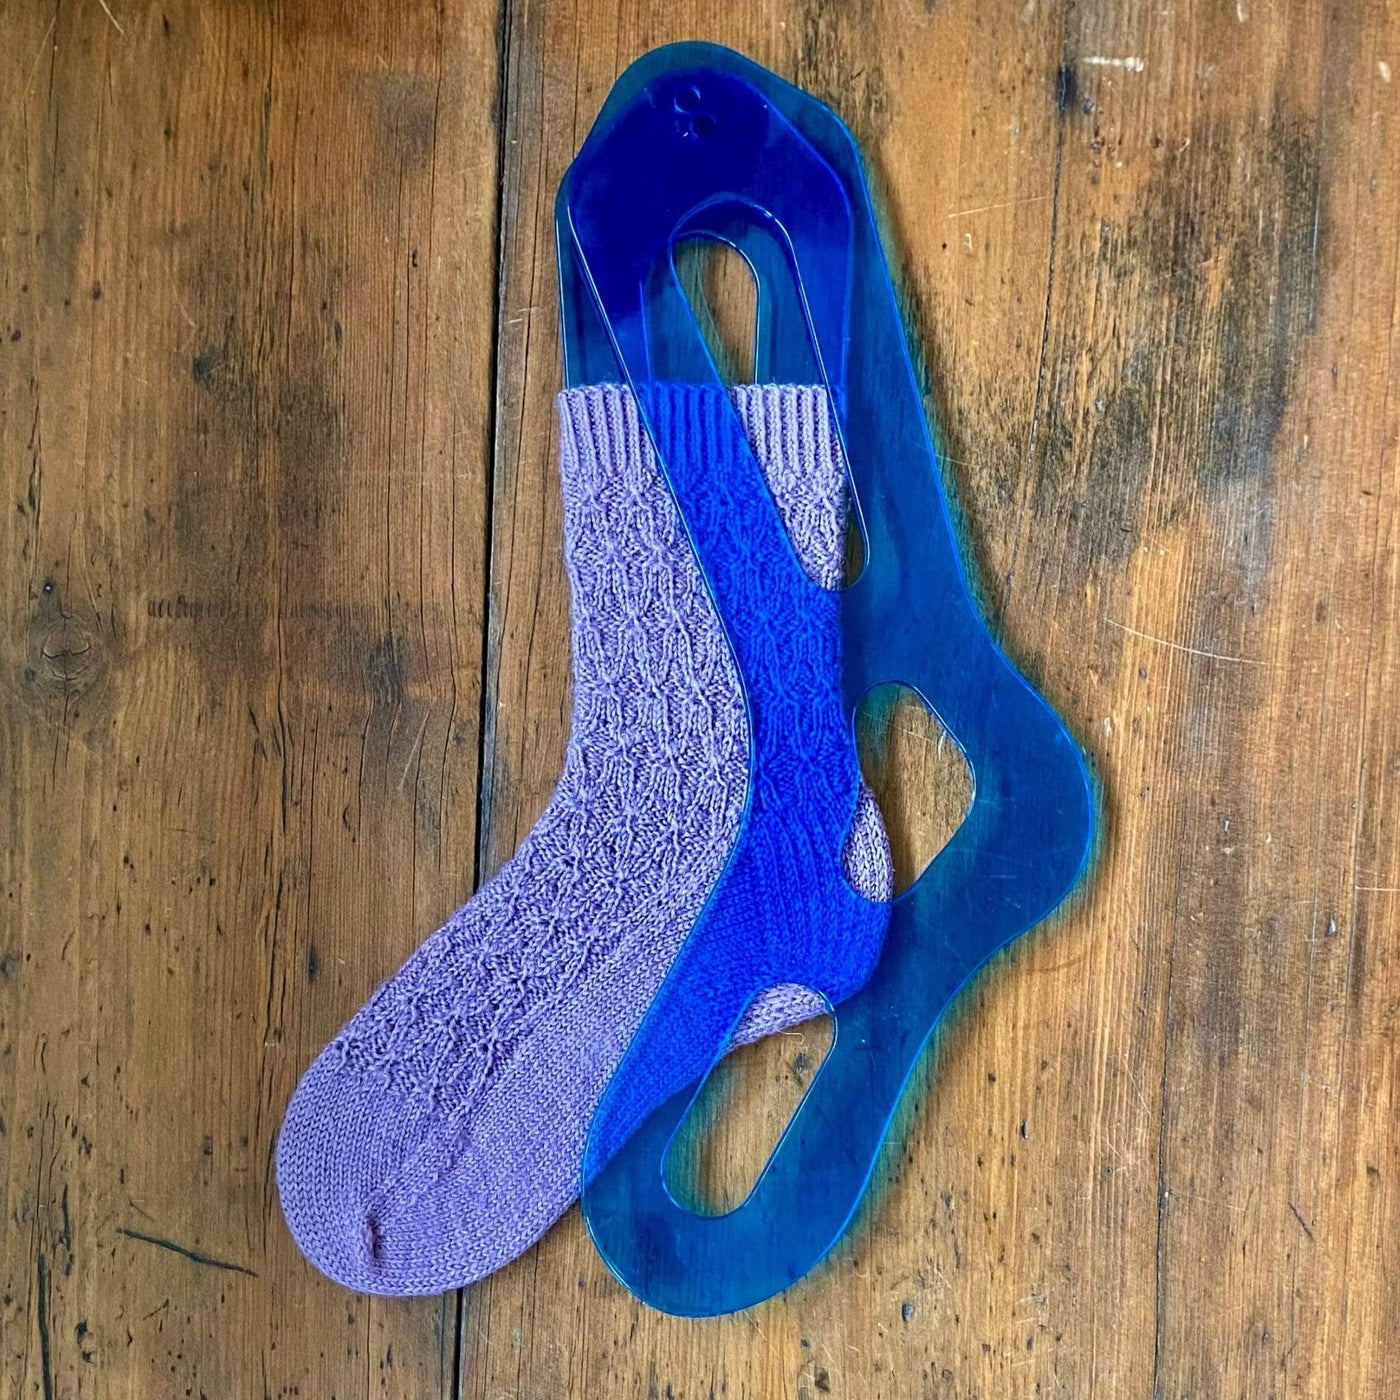 Acrylic sock blockers for knit socks in a women's size medium. Shown with a hand knit Agatha Sock knit in West Yorkshire Spinners yarn.